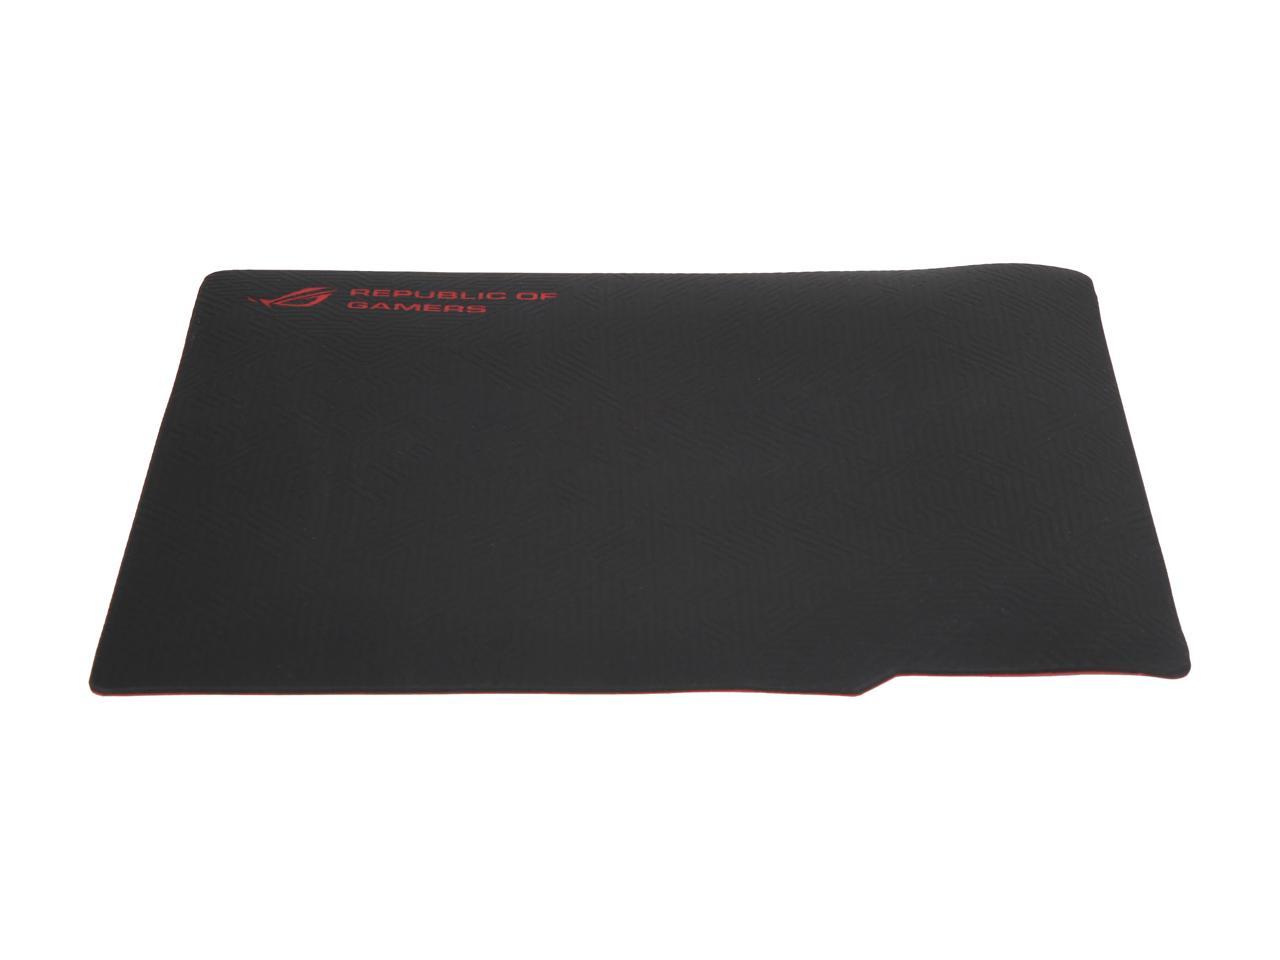 Durable and Lightweight ASUS Rollable Gaming Mouse Pad ROG Whetstone Pad Silicone Based Gaming Mouse Pad for Smooth Precise & Silent Control 